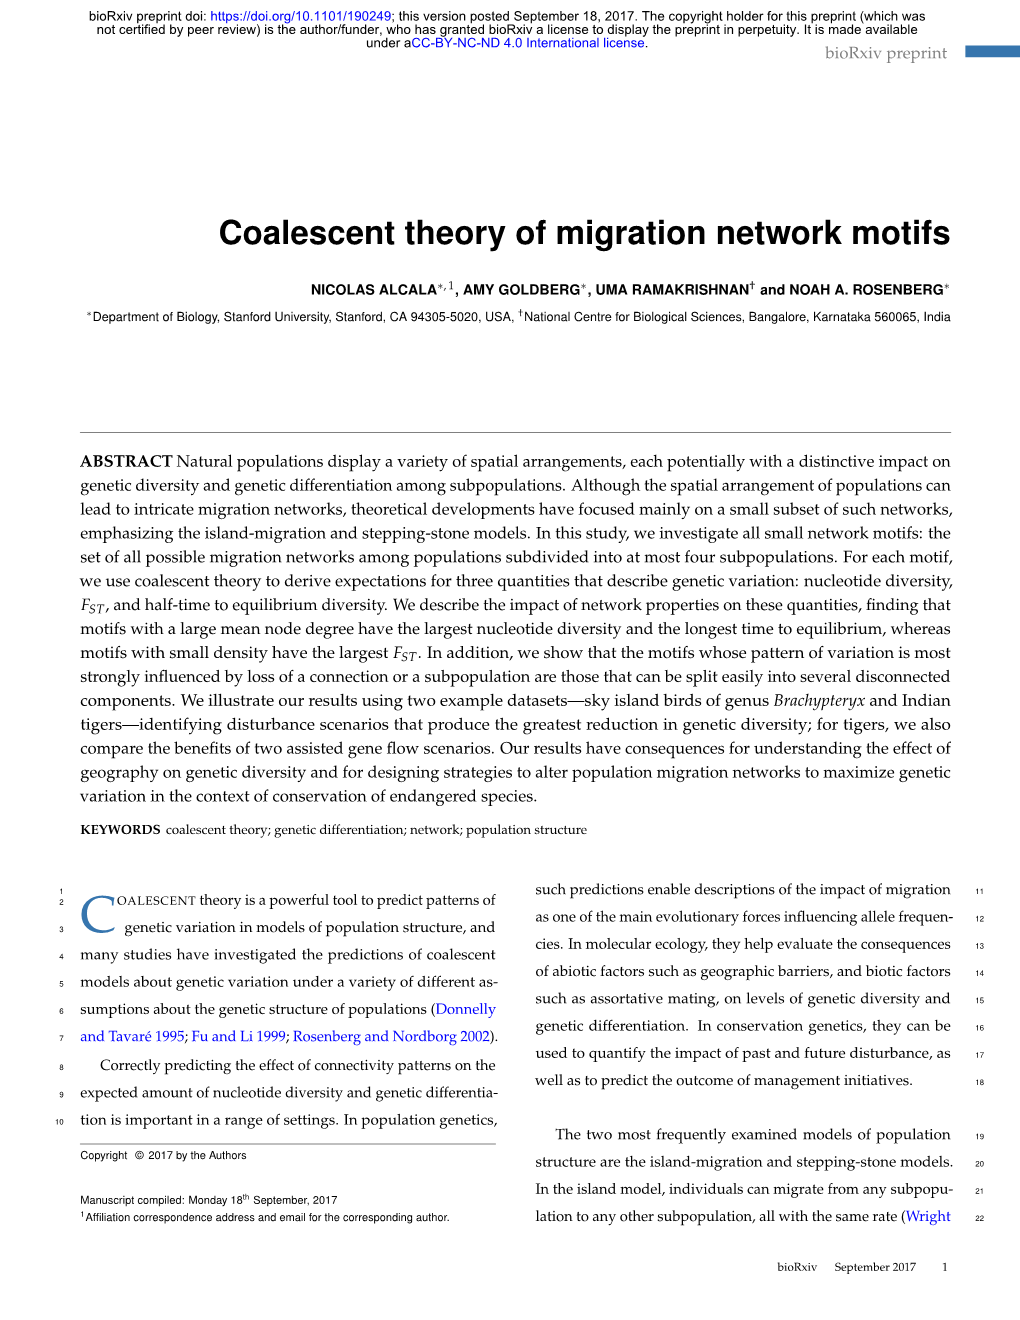 Coalescent Theory of Migration Network Motifs